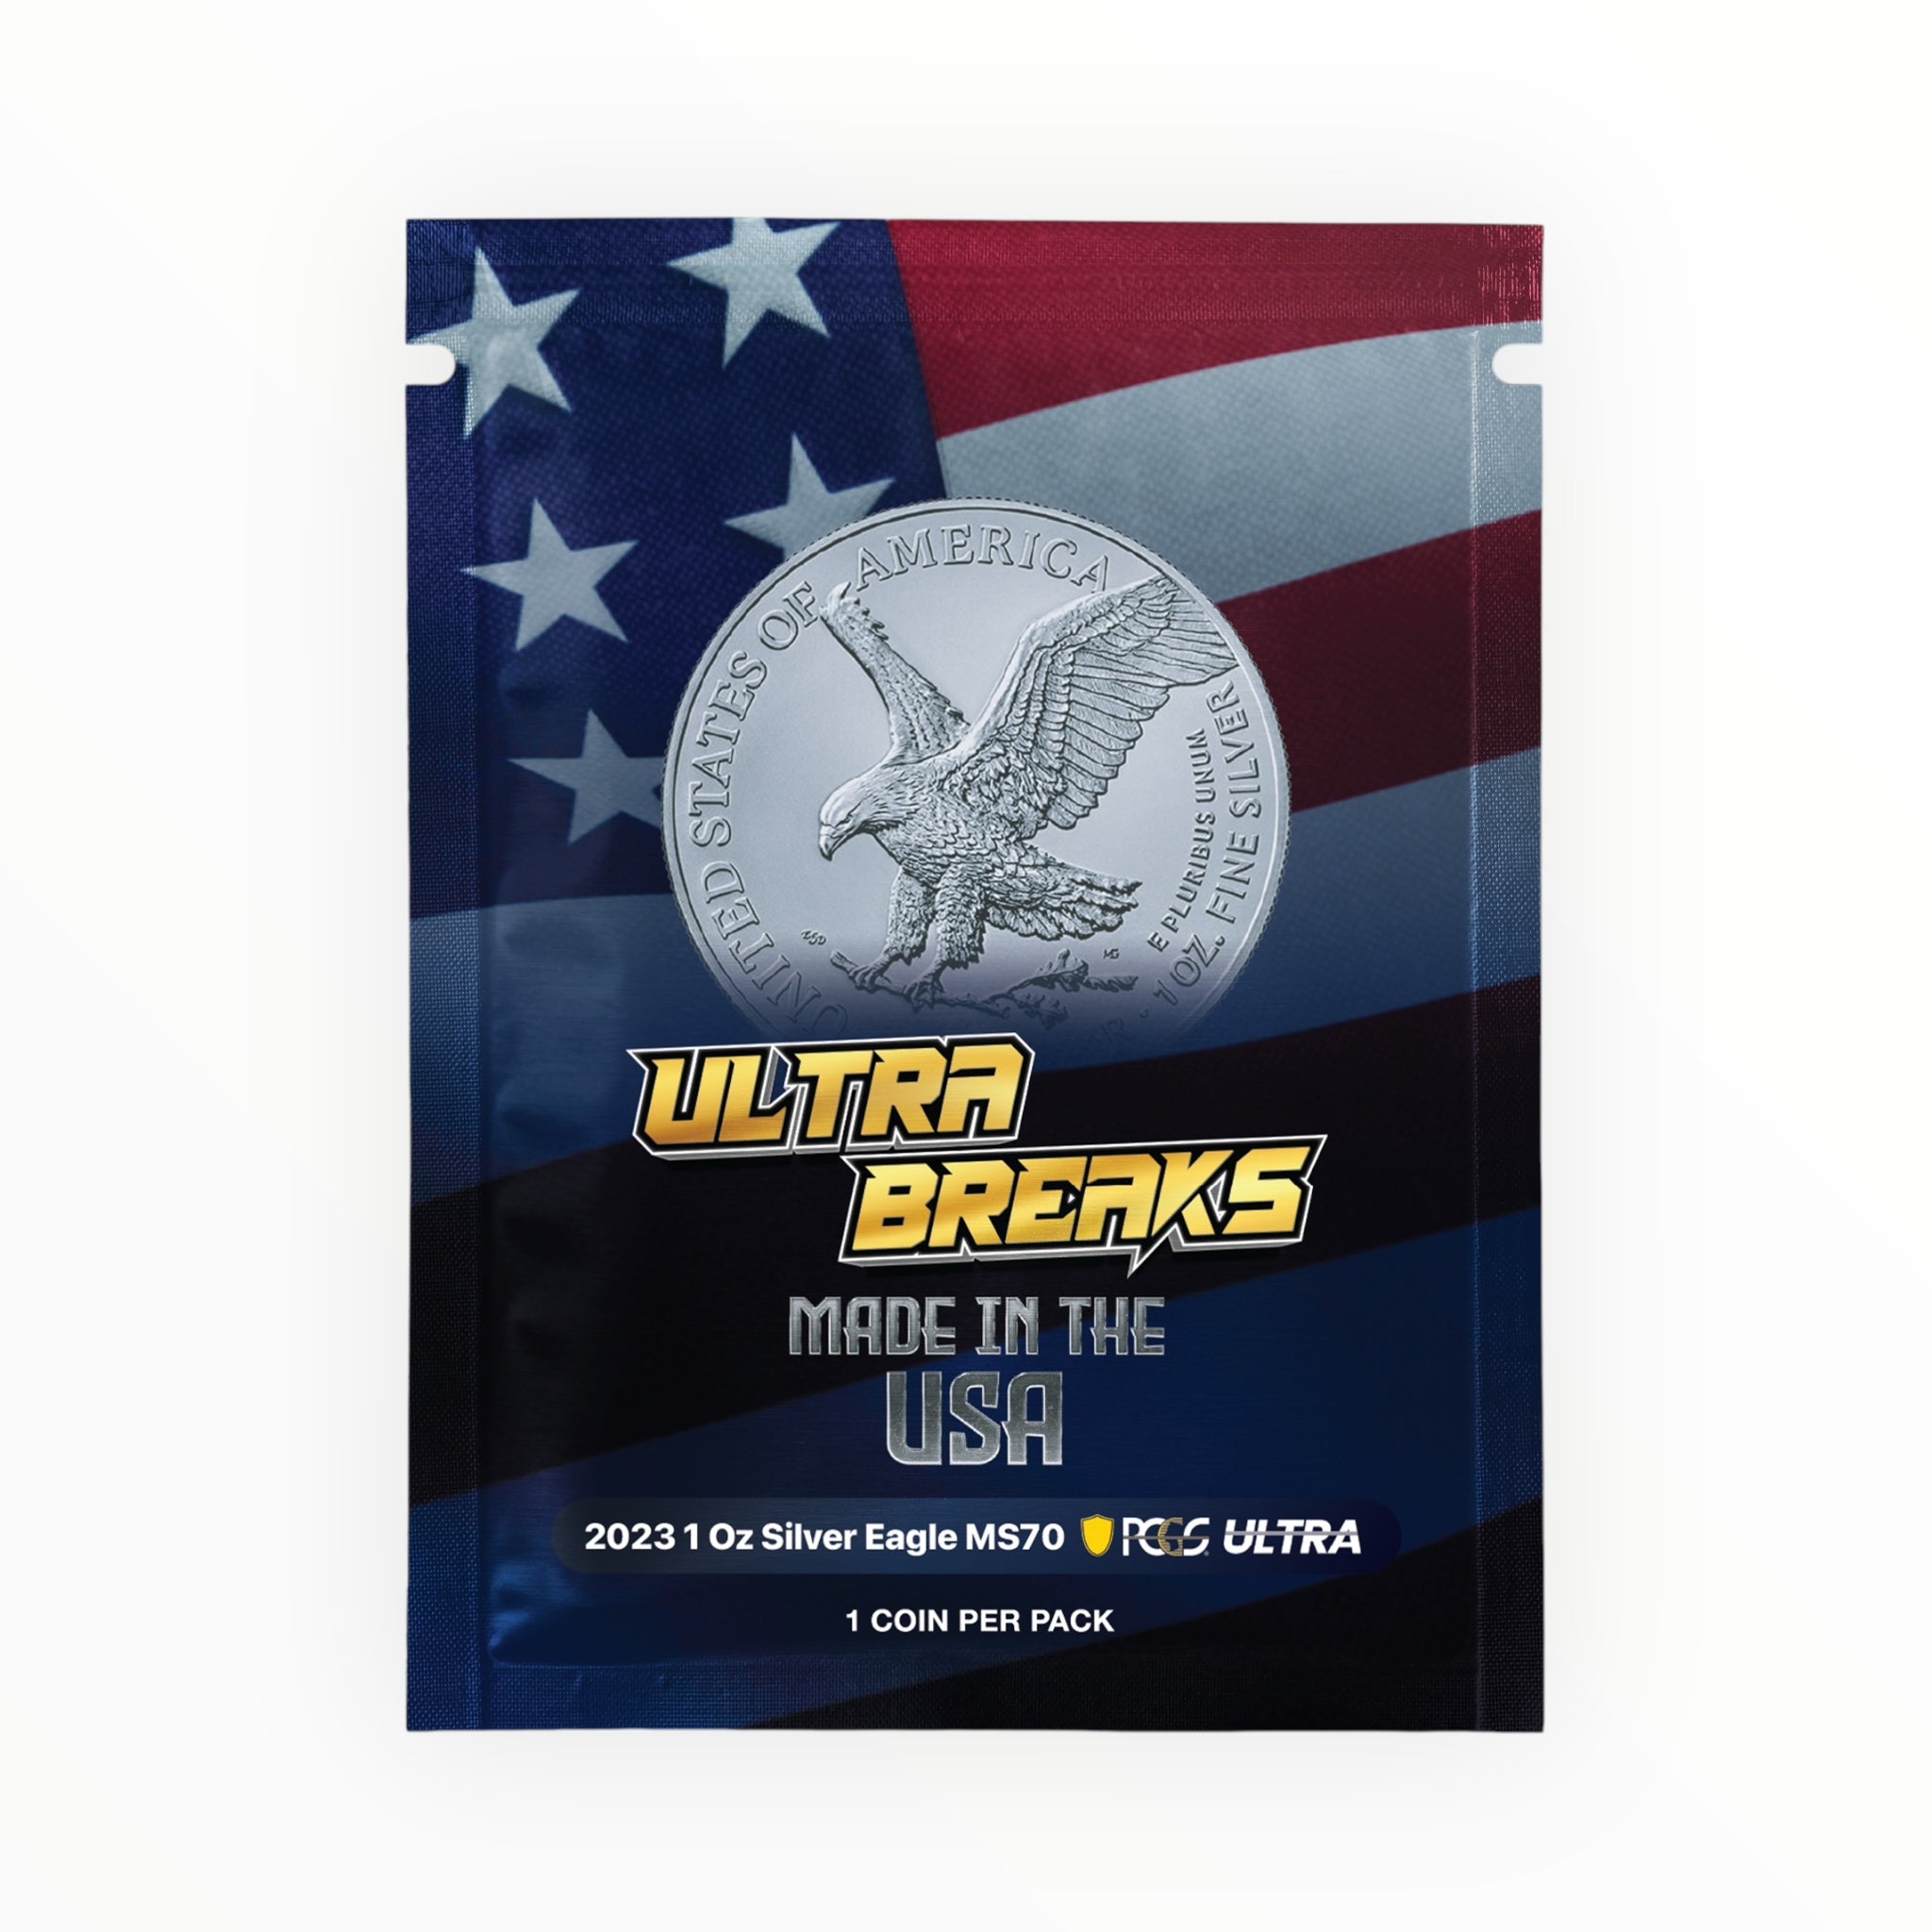 2023 Ultrabreaks Made in the USA Pack (RIPPED LIVE - IG)